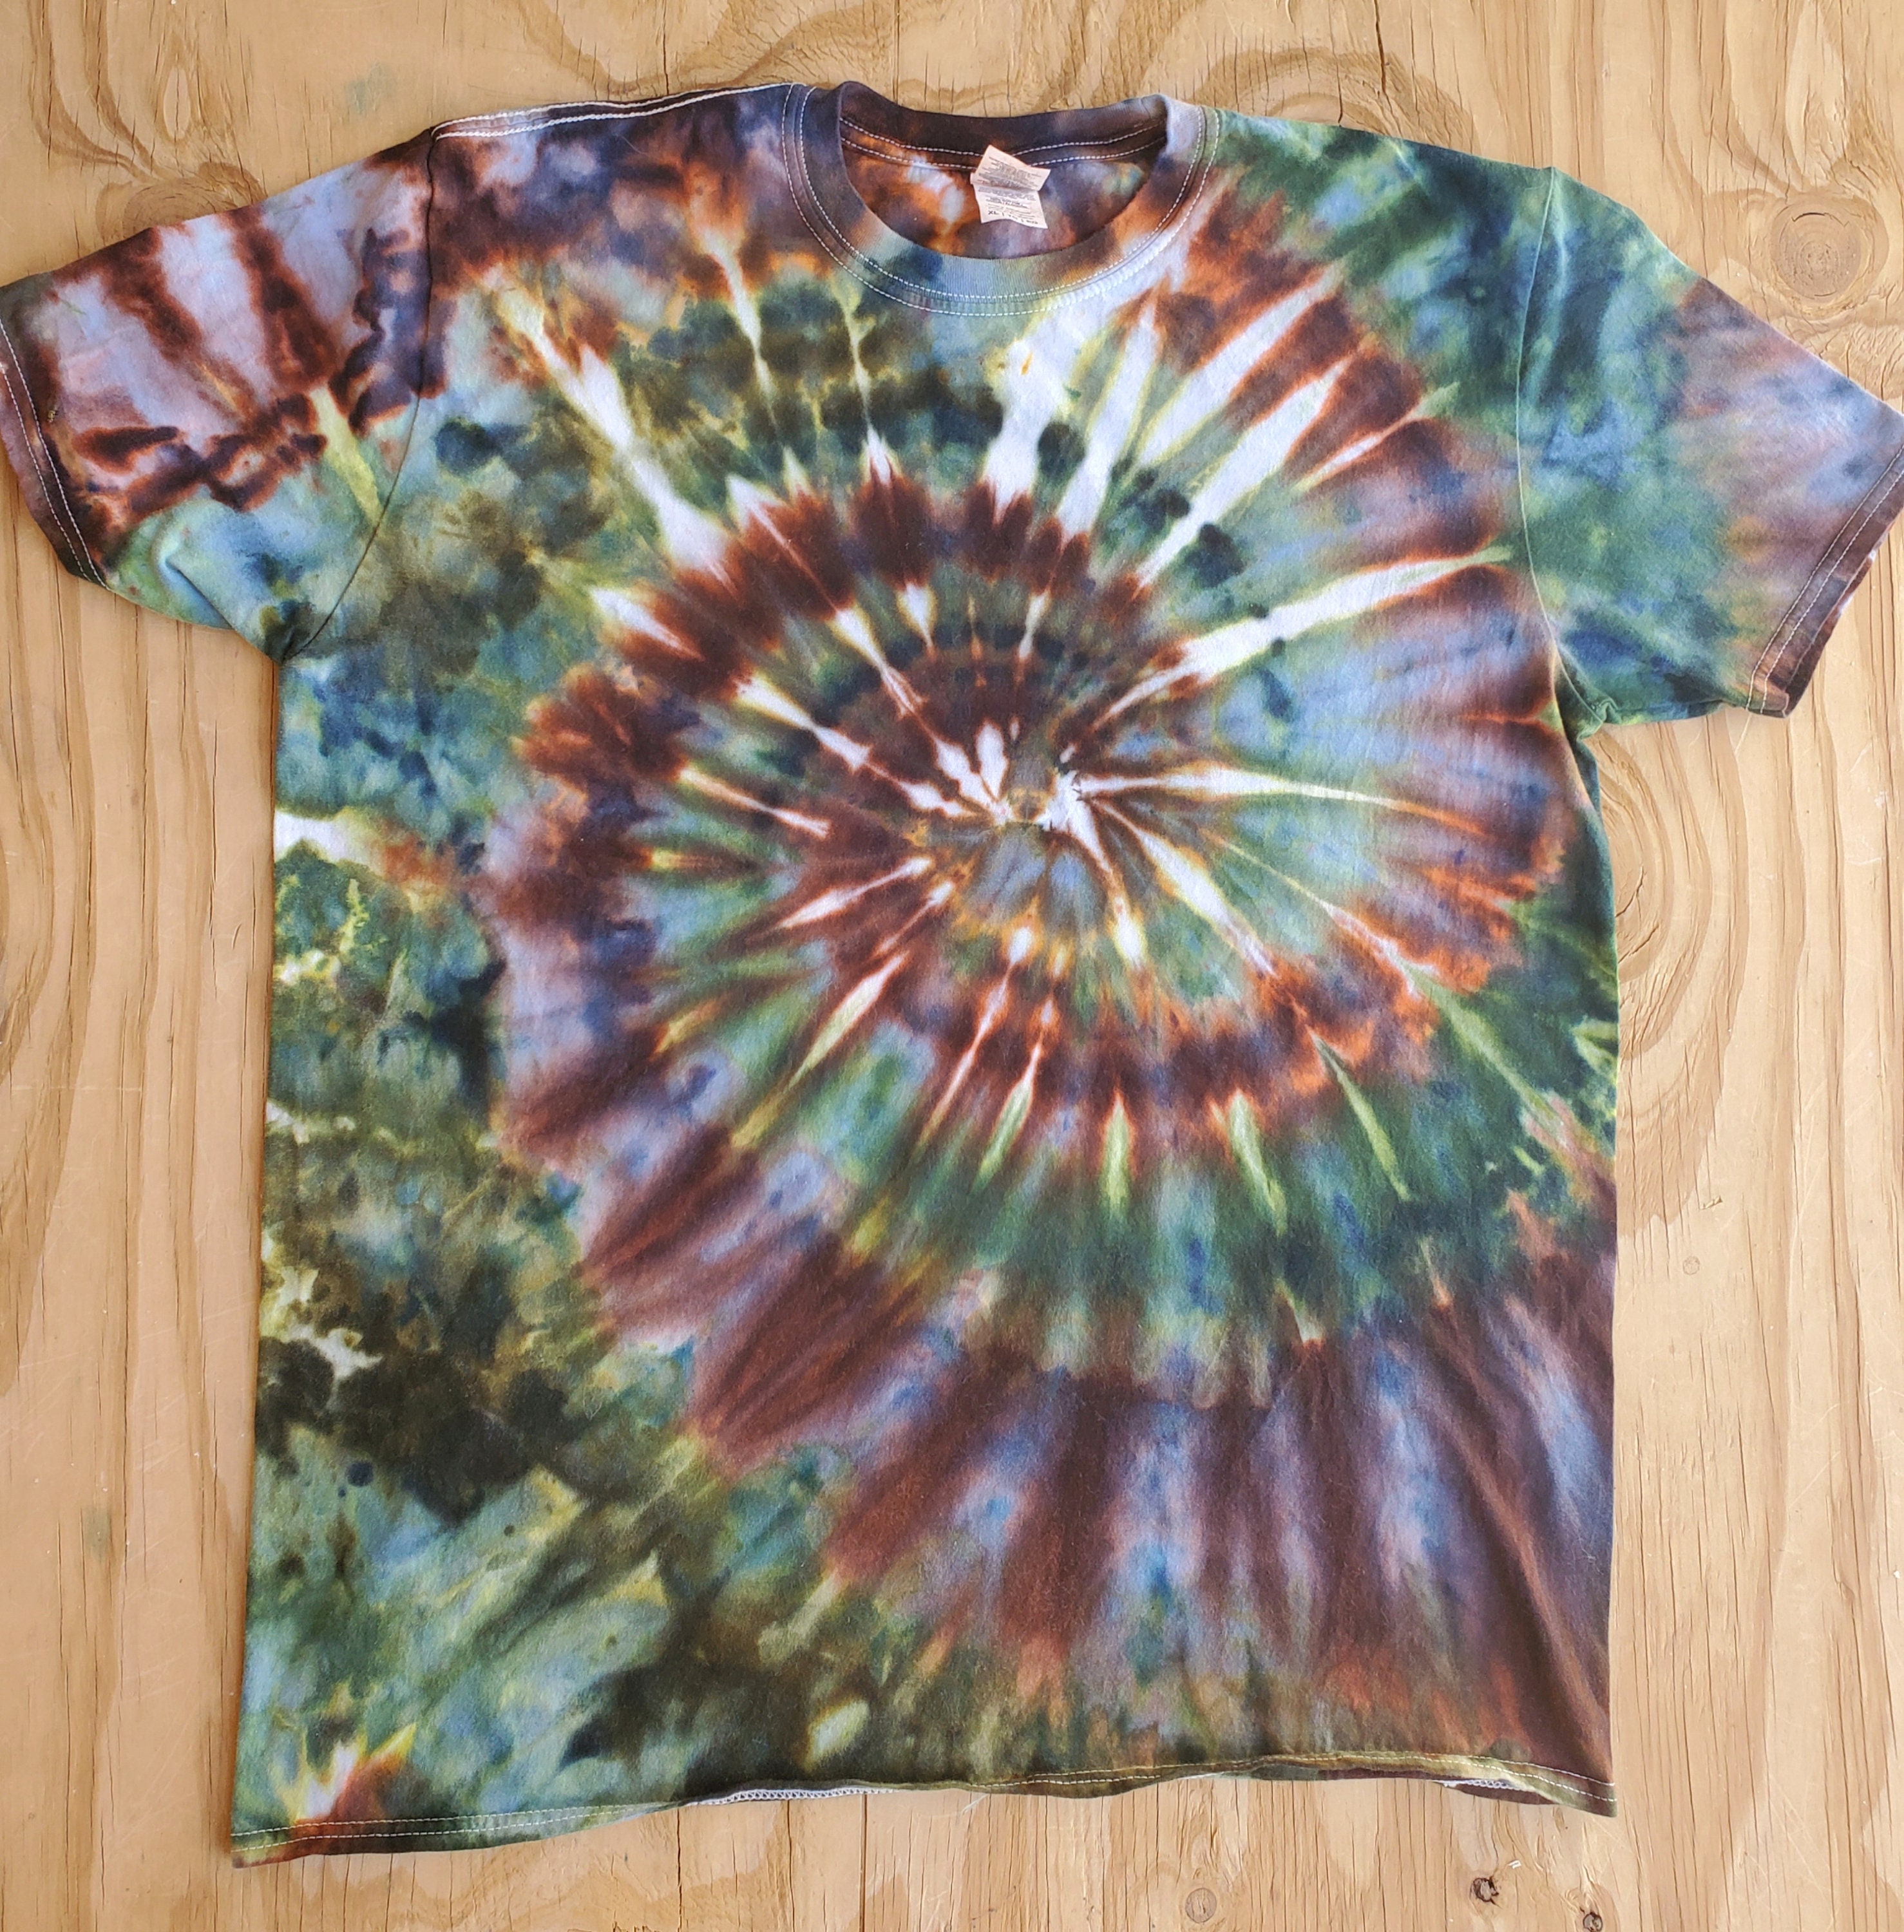 Green Forest Tie Dye Shirt Short Sleeve Adult or Women's - Etsy